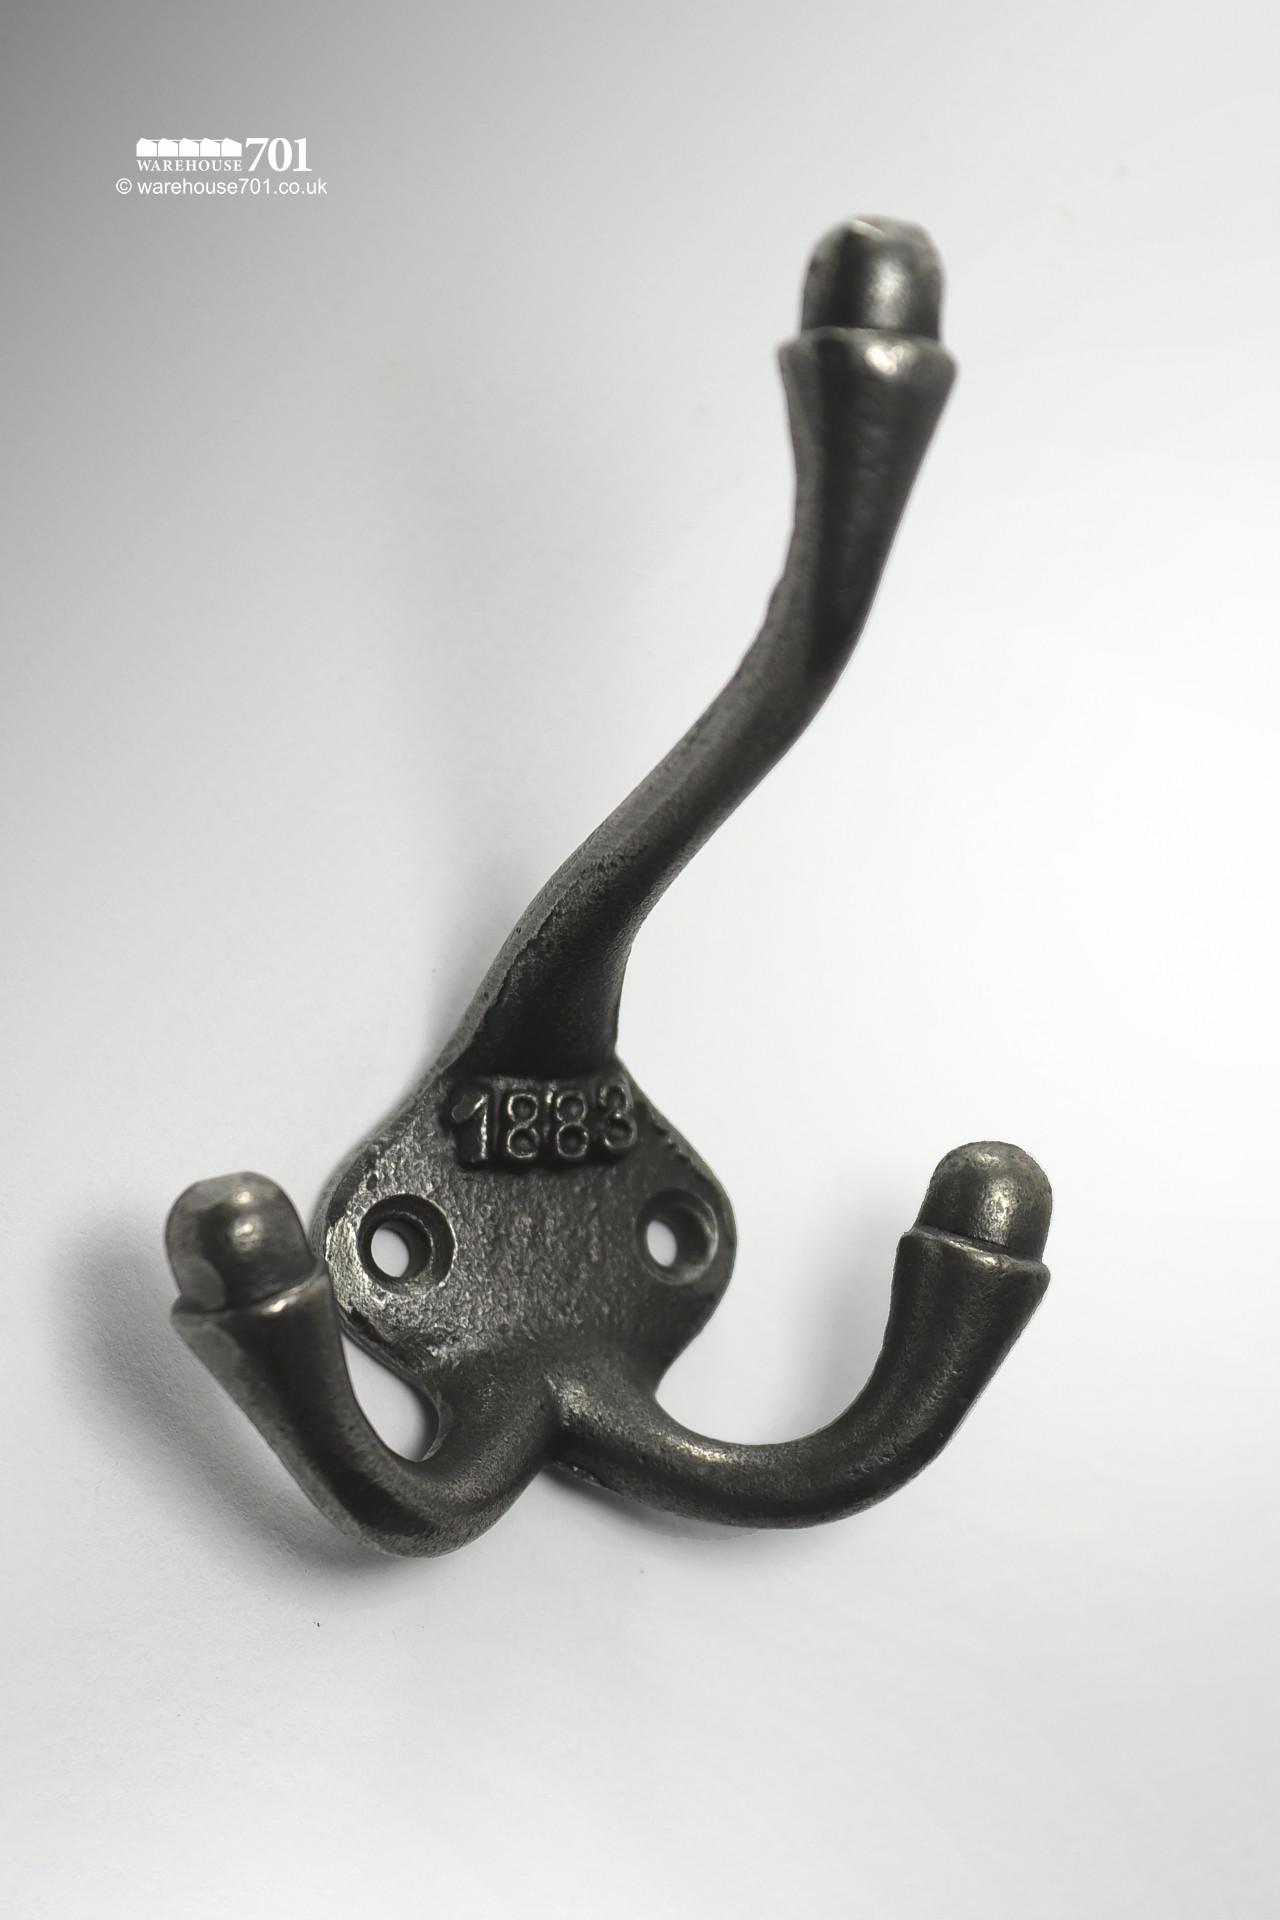 New Cast Iron Triple Coat Hook  with '1883' Raised Lettering